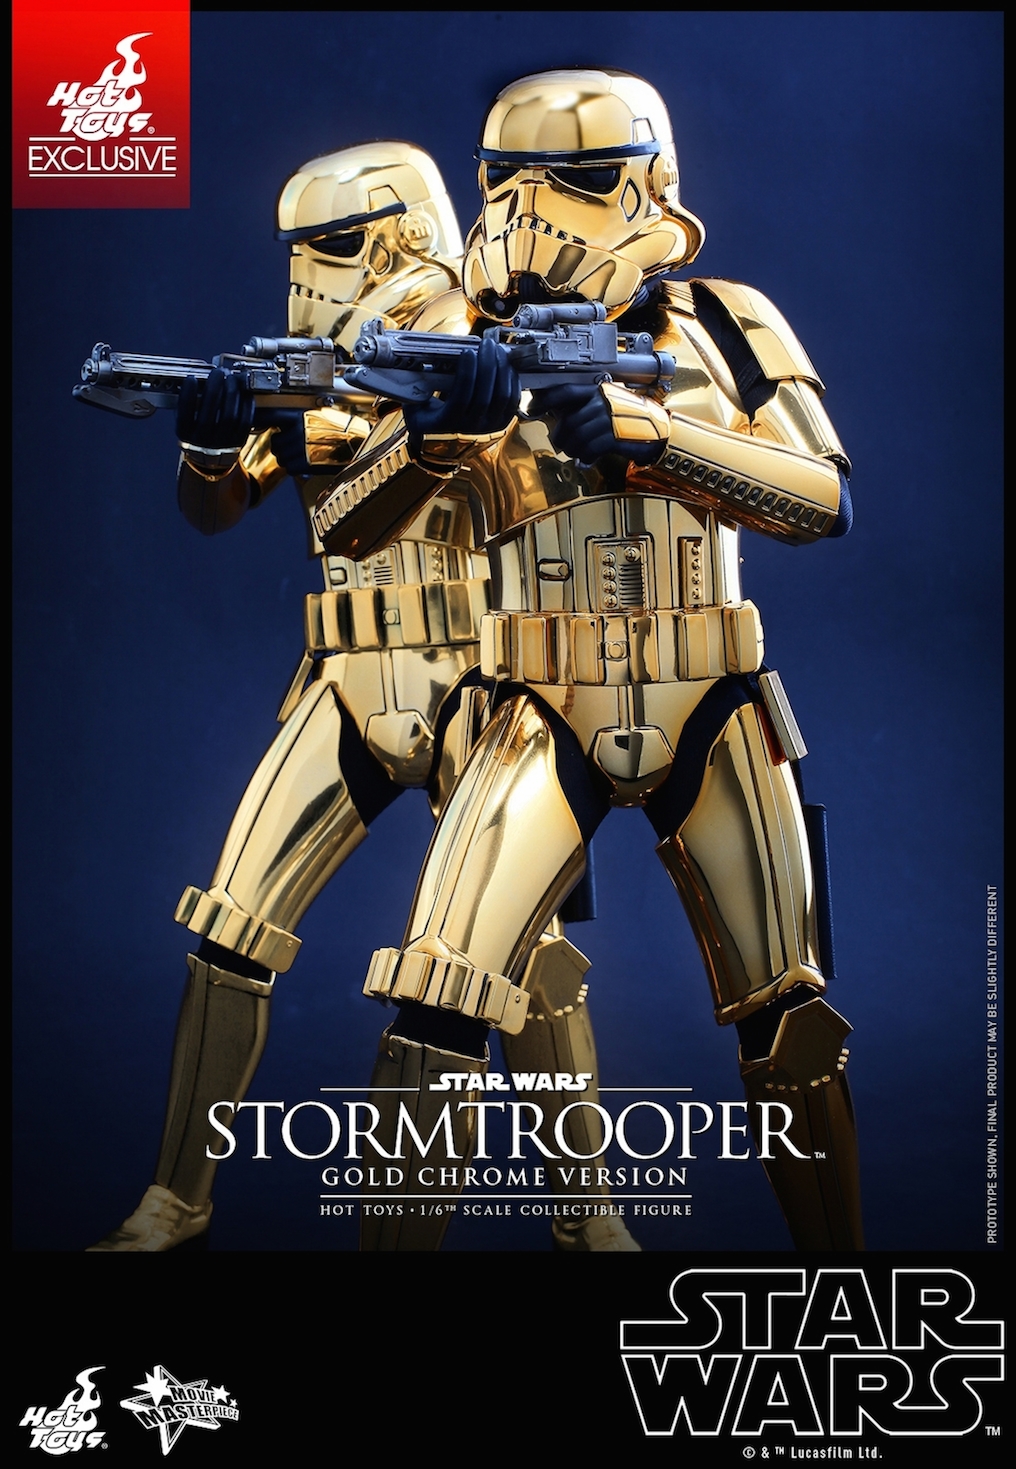 New Th Scale Gold Chrome Plated Action Figure Of An Imperial Stormtrooper Has Been Revealed